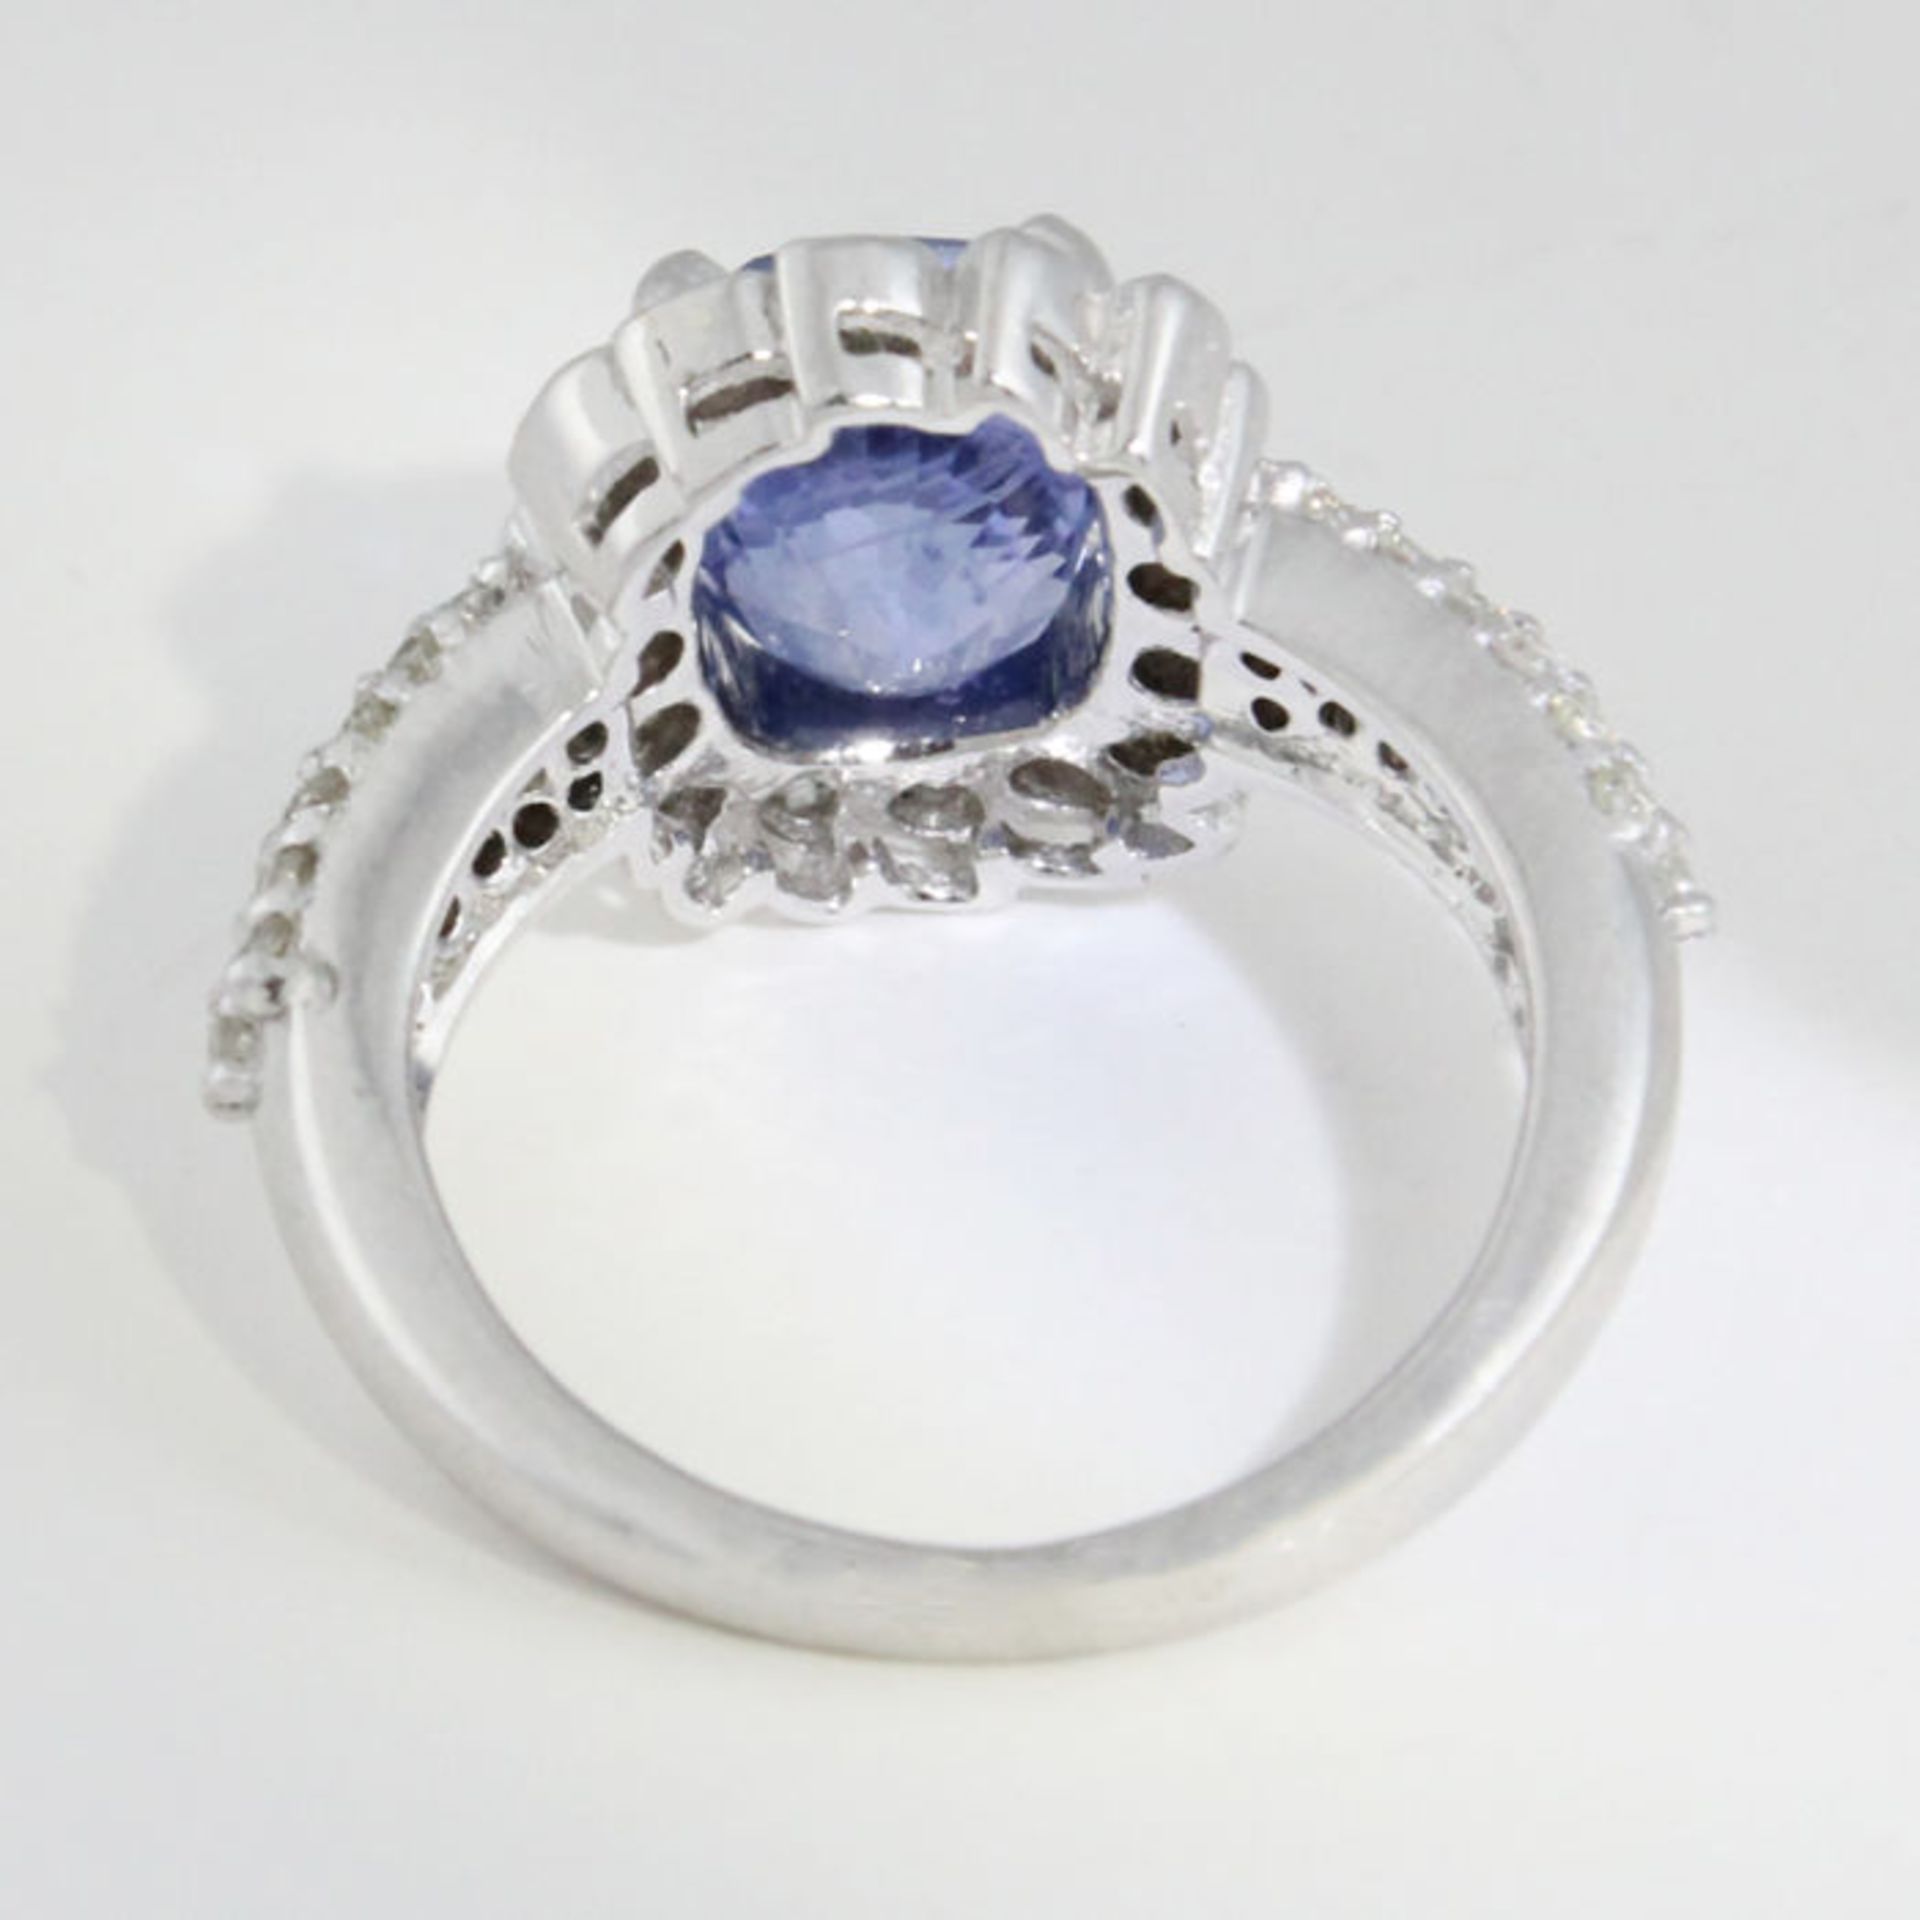 14 K / 585 White Gold Very Exclusive Designer Blue Sapphire (IGI Certified) and Diamond Ring - Image 6 of 7